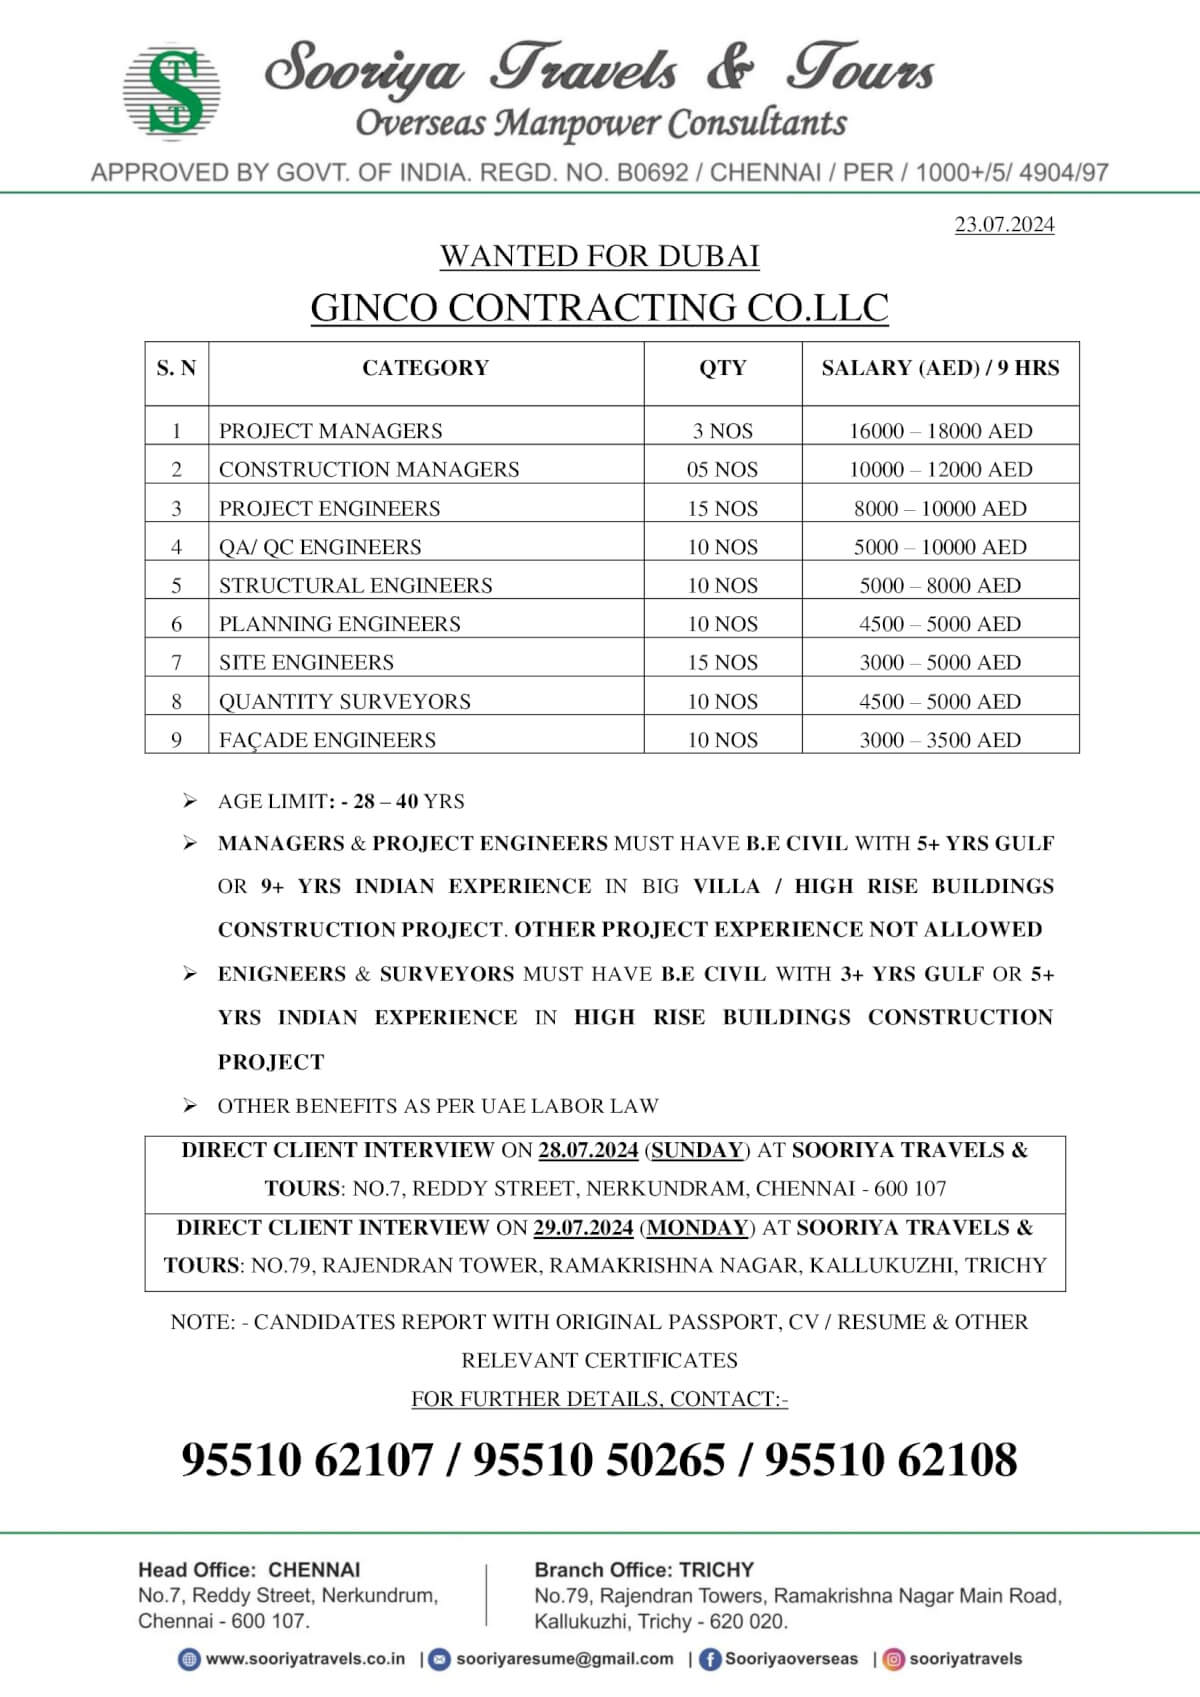 WANTED FOR DUBAI GINCO CONTRACTING CO.LLC